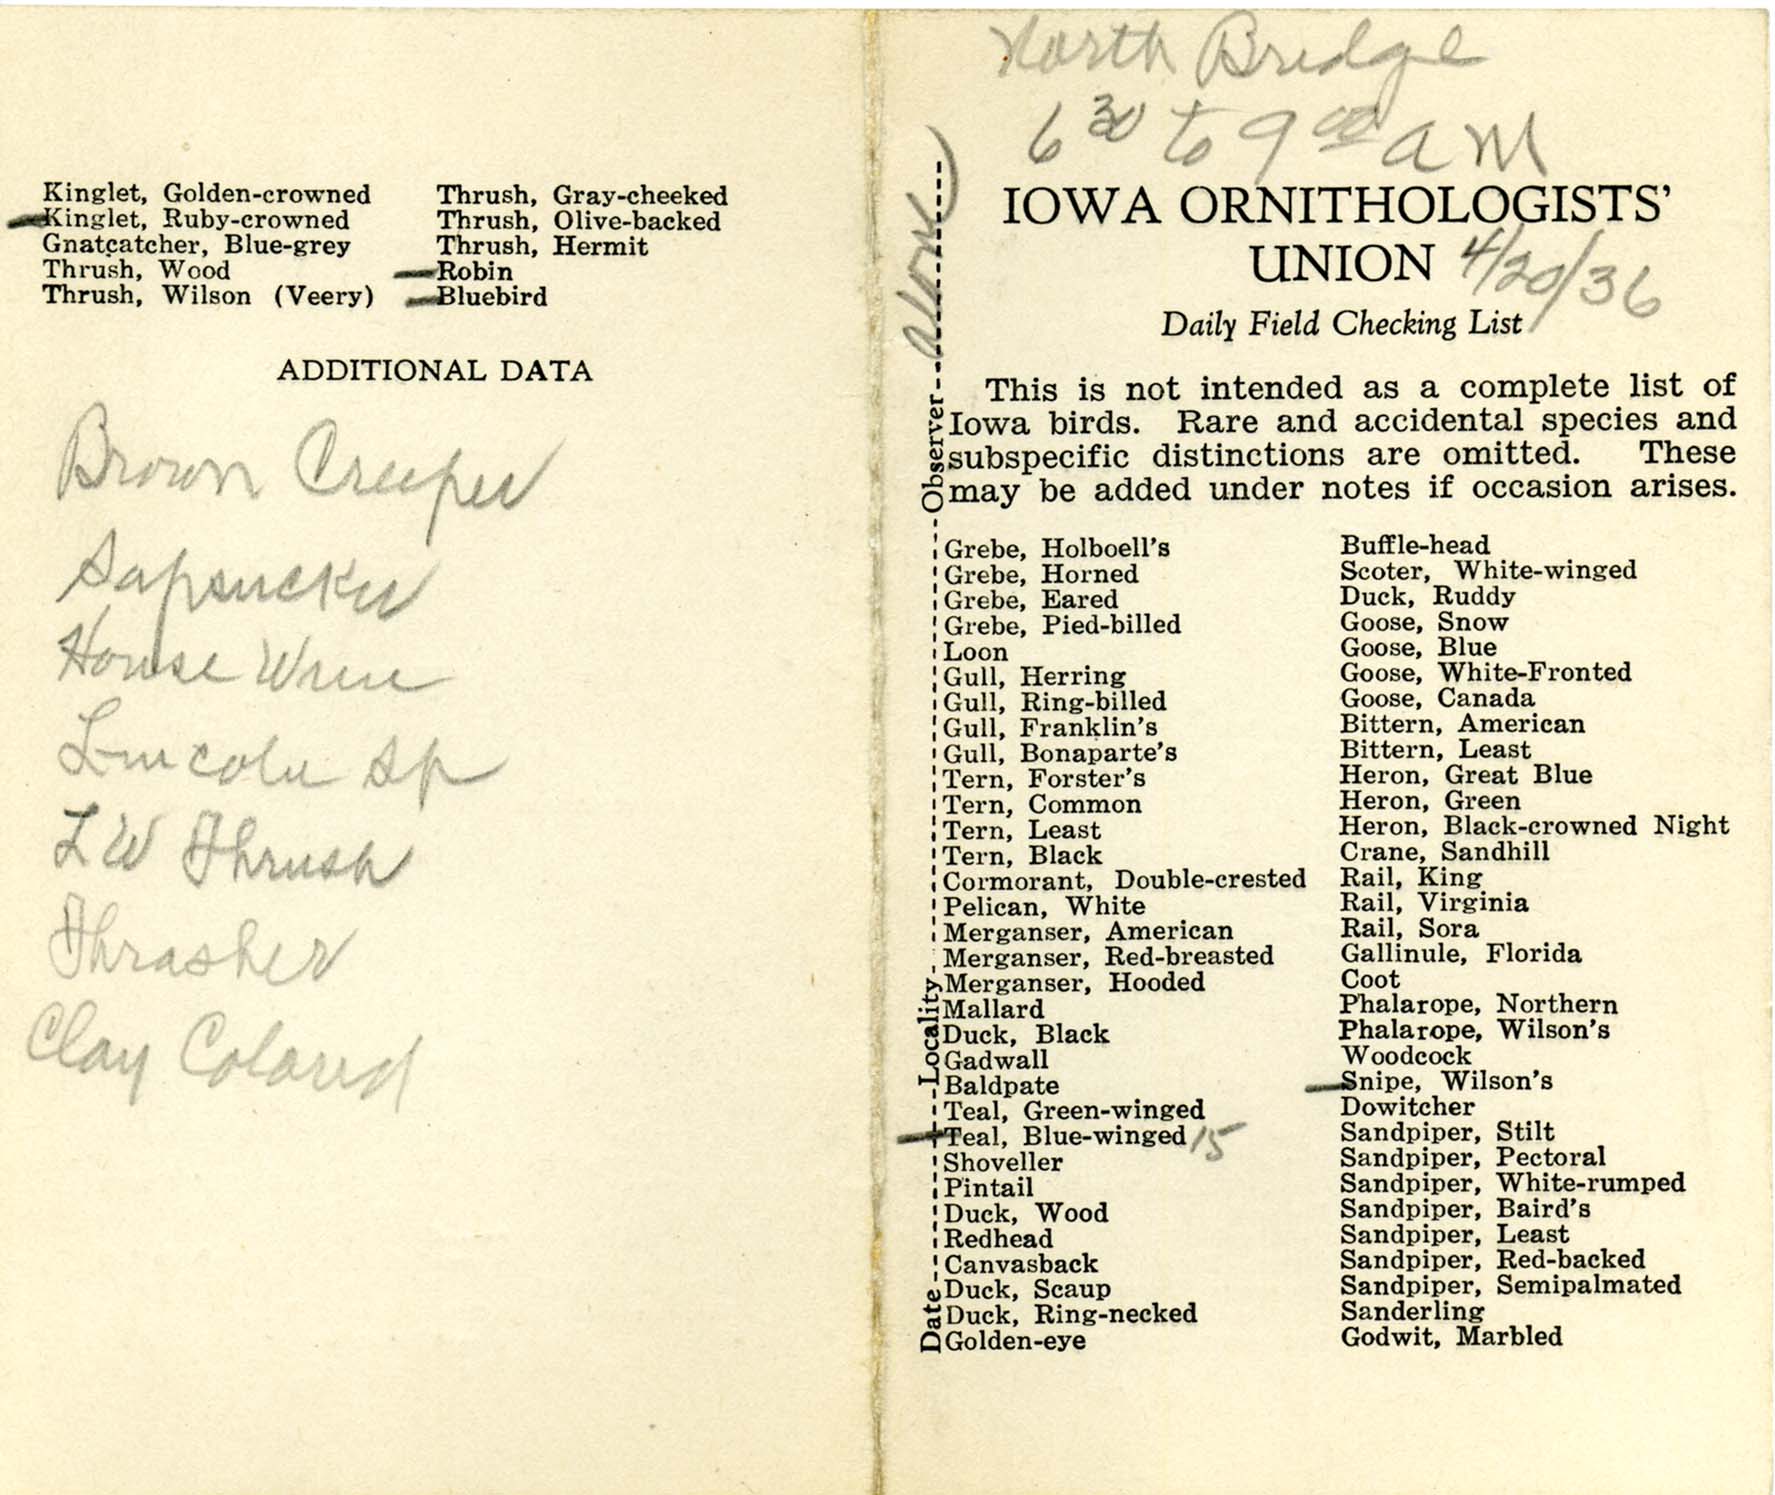 Daily field checking list by Walter Rosene, April 20, 1936